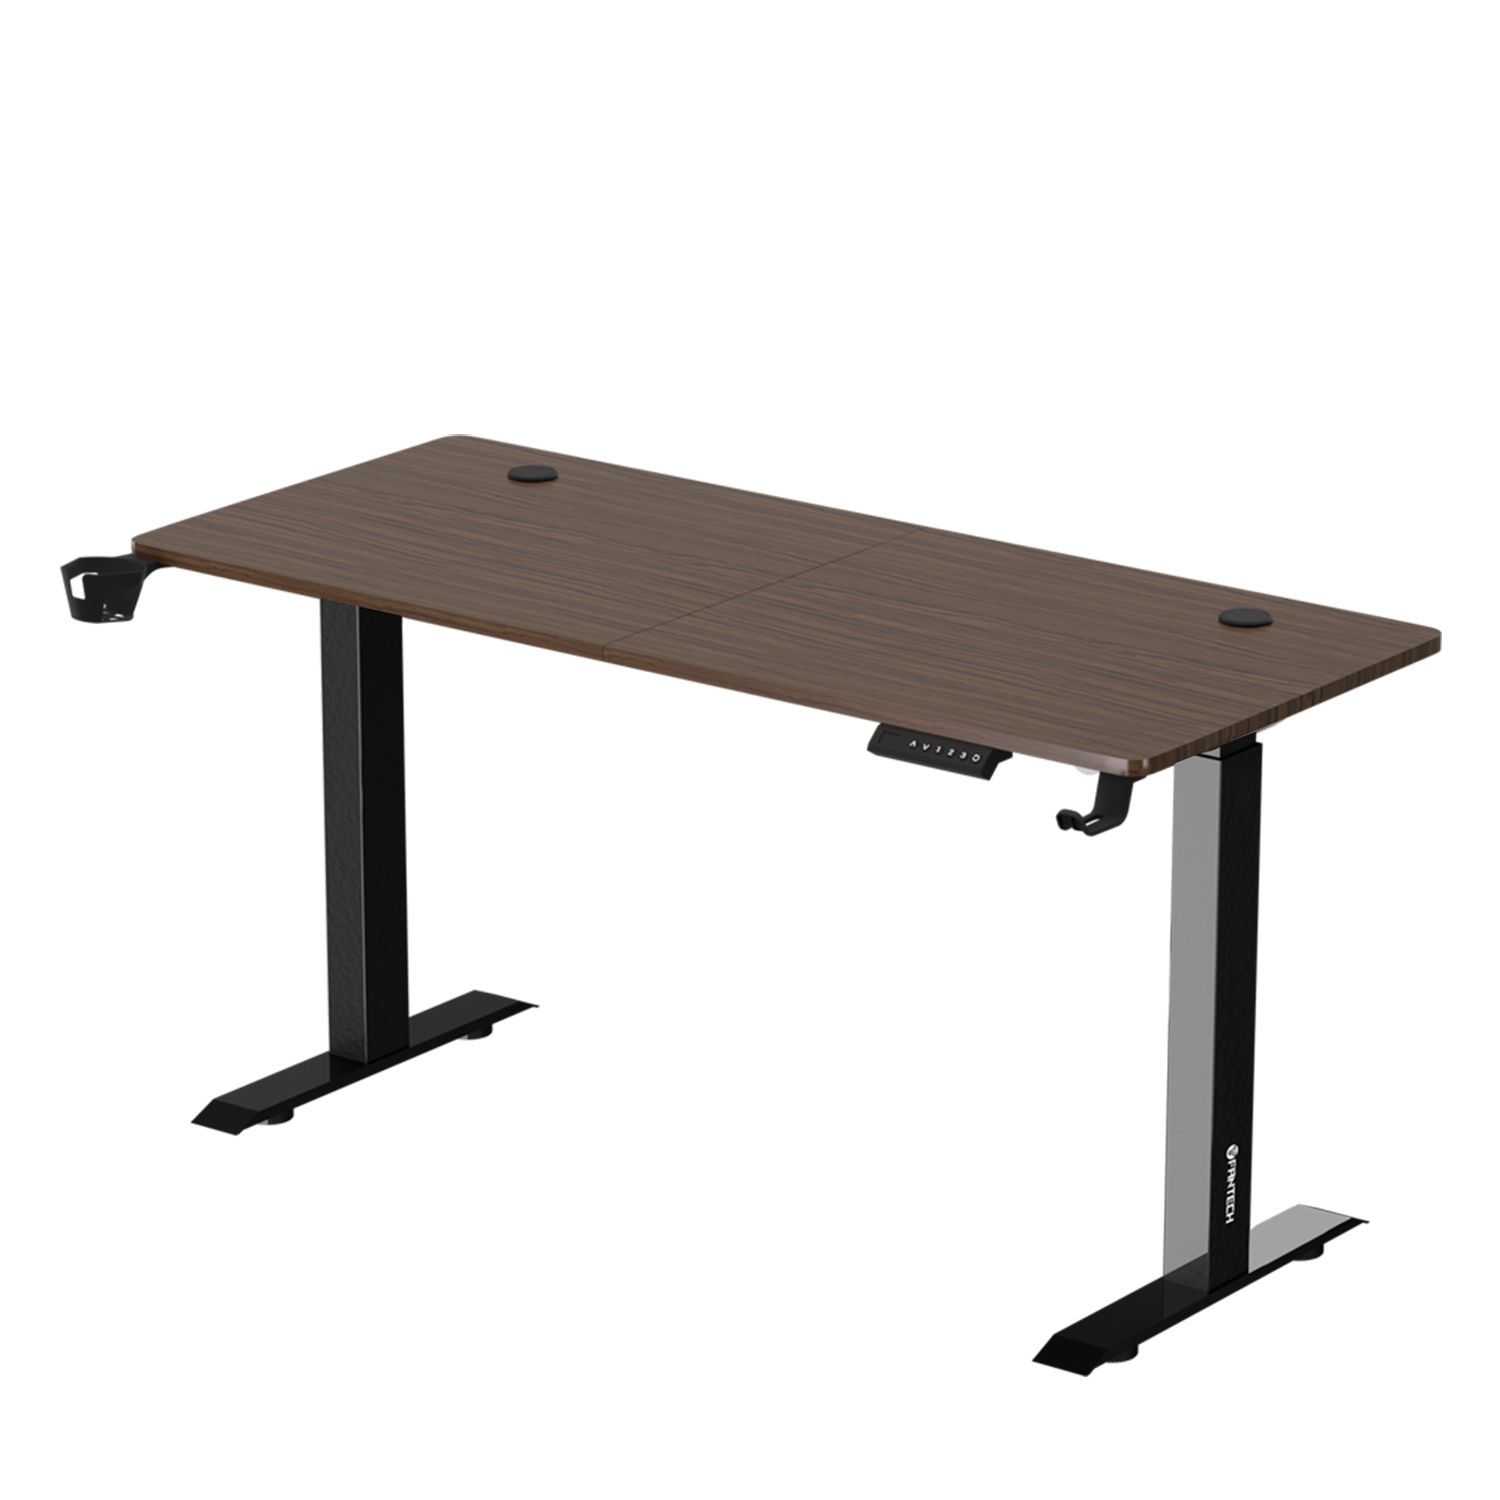 Fantech GD914 Office Desk Height Adjustable Motorised Electric Stand Gaming Table 140x60cm (Walunt/Black)